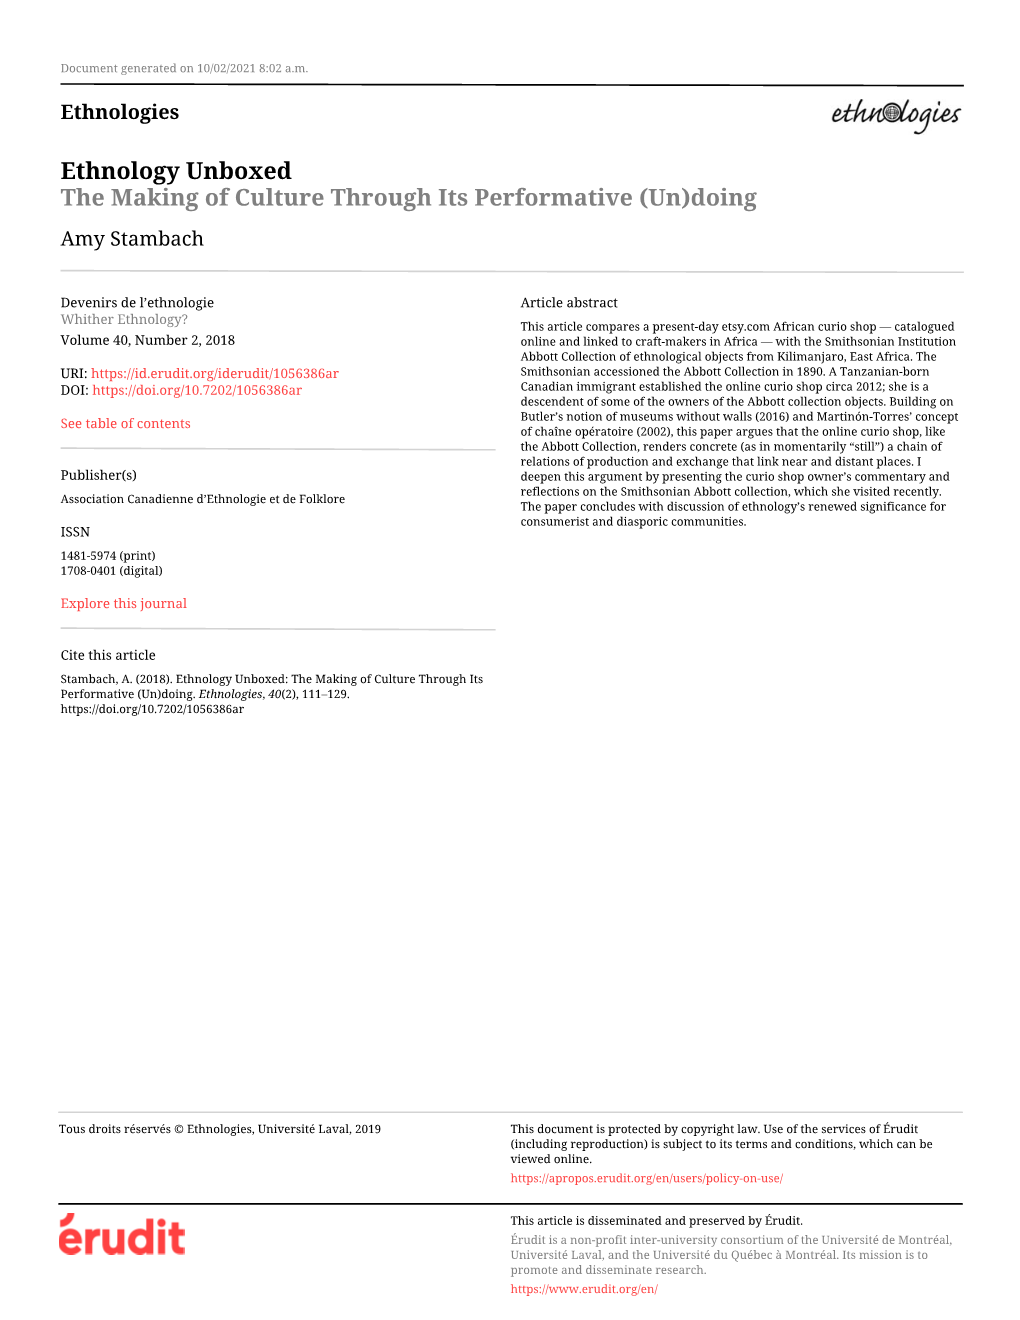 Ethnology Unboxed the Making of Culture Through Its Performative (Un)Doing Amy Stambach